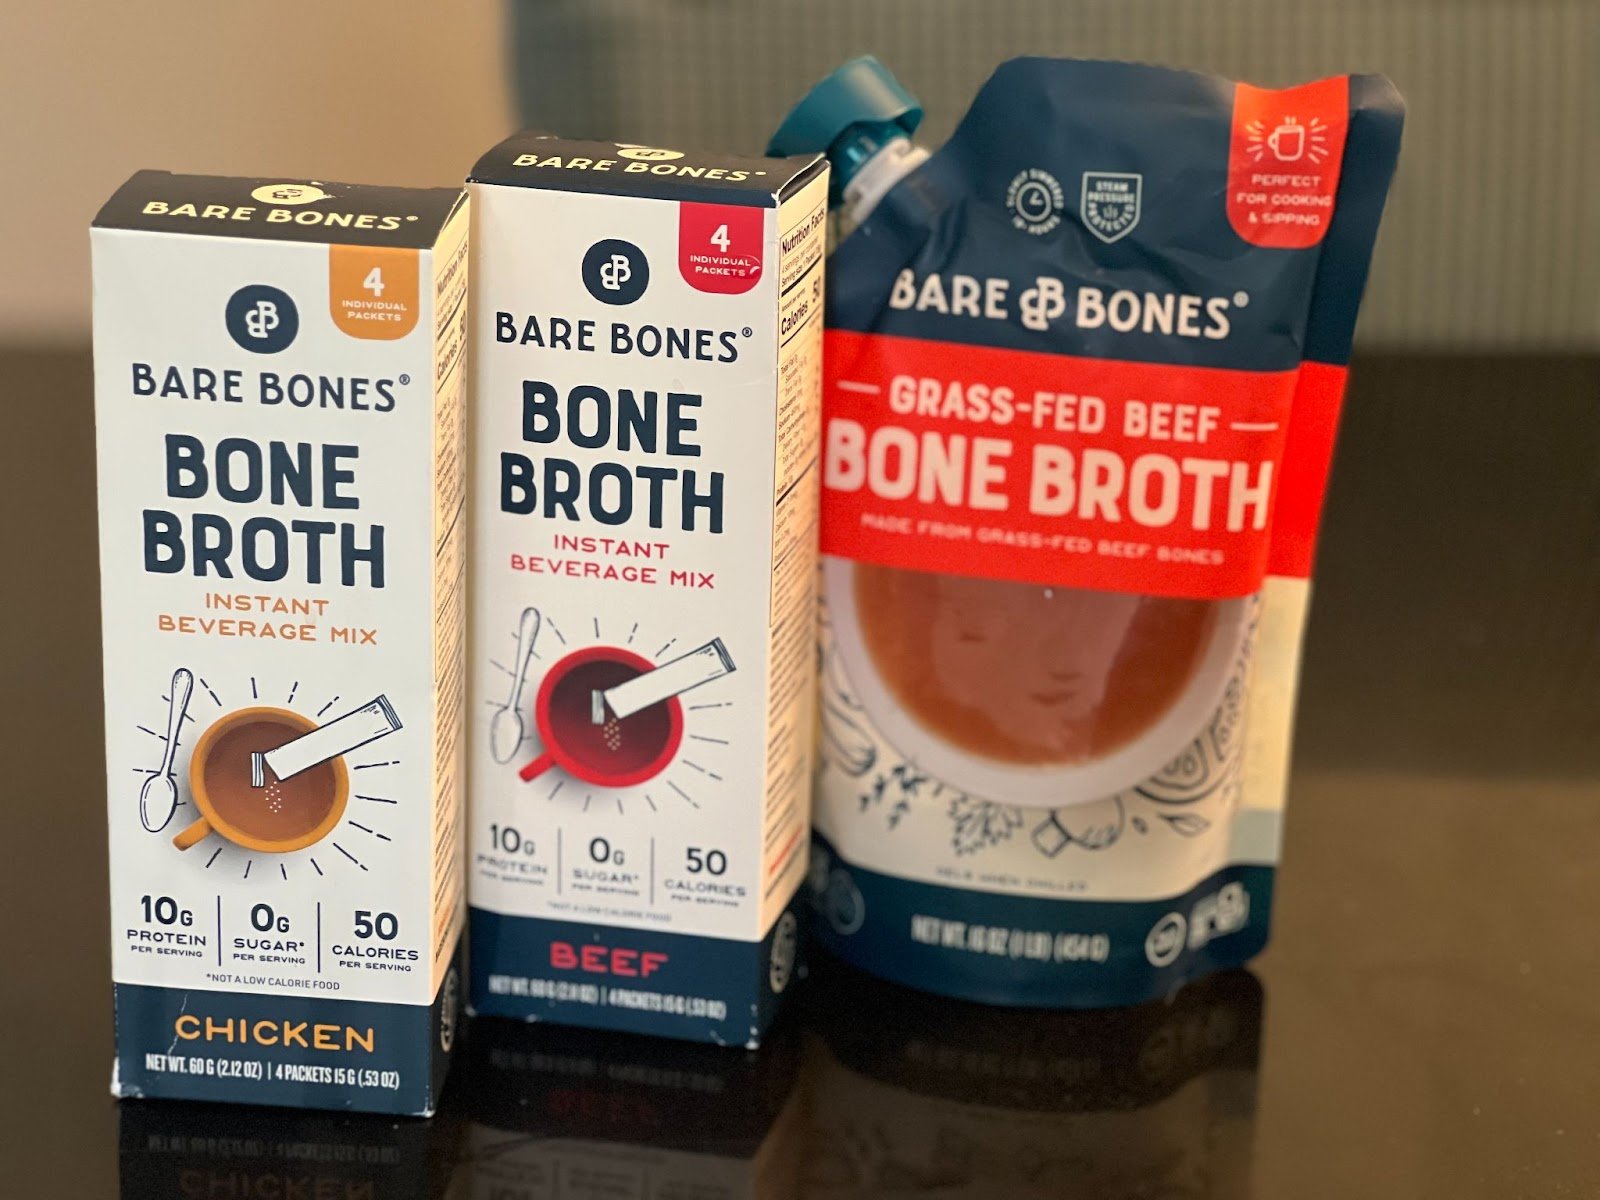 Instant Bone Broth, Instant Beverage Mix, and Grass-fed Beef Bone Broth